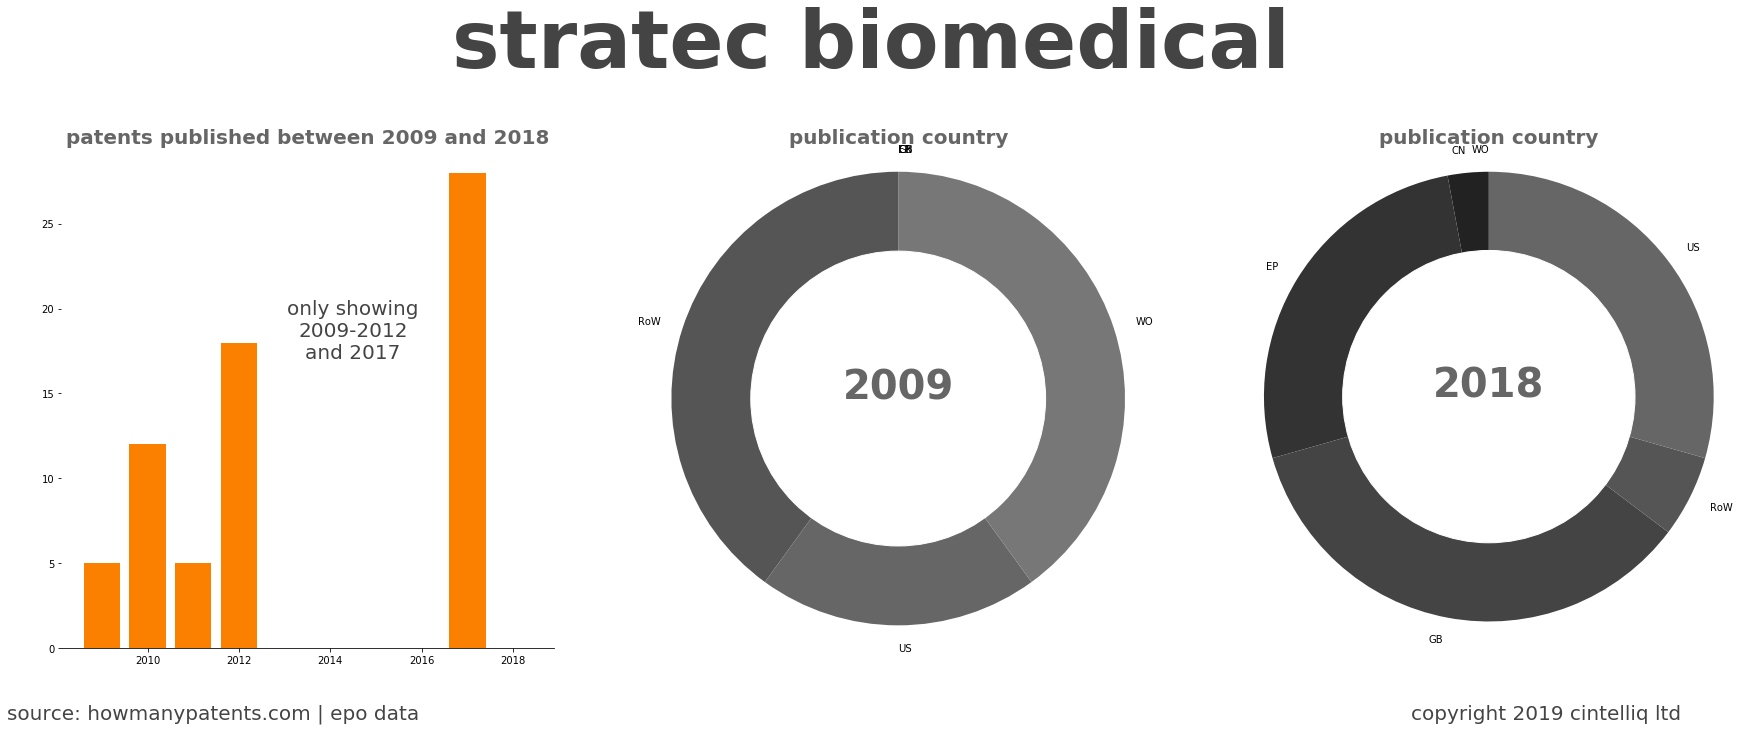 summary of patents for Stratec Biomedical